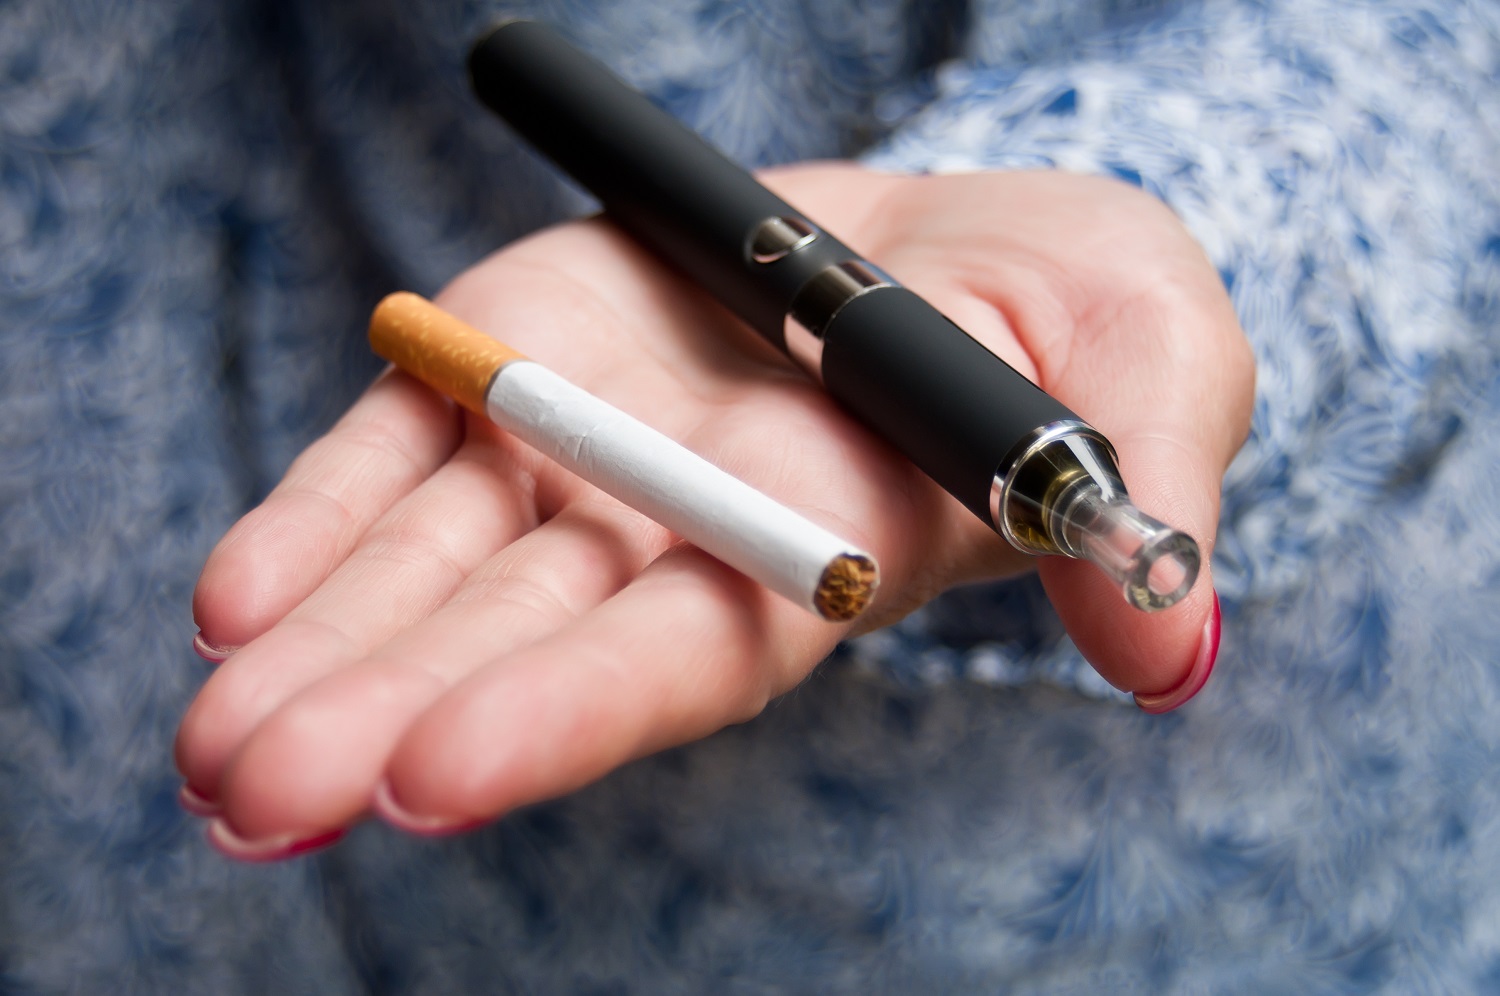 would cigarettes be safe to smoke if we took the nicotine out of tobacco